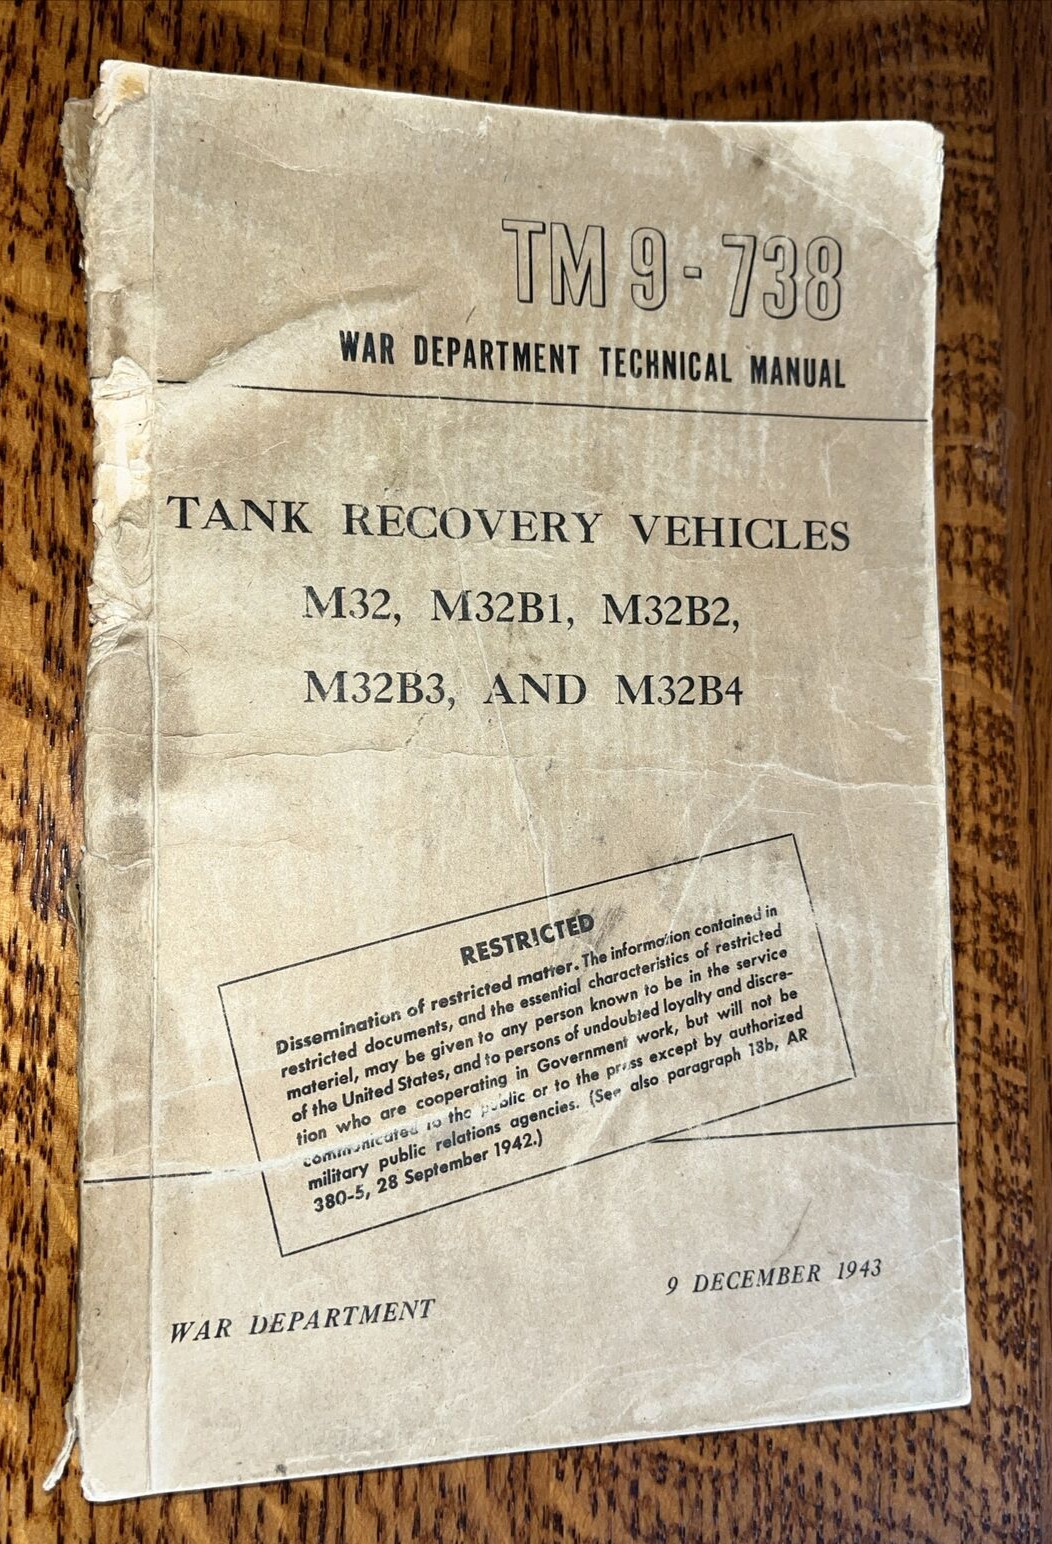 WWII War Department Restricted TM9 738 Tank Recovery Vehicles December 9, 1943